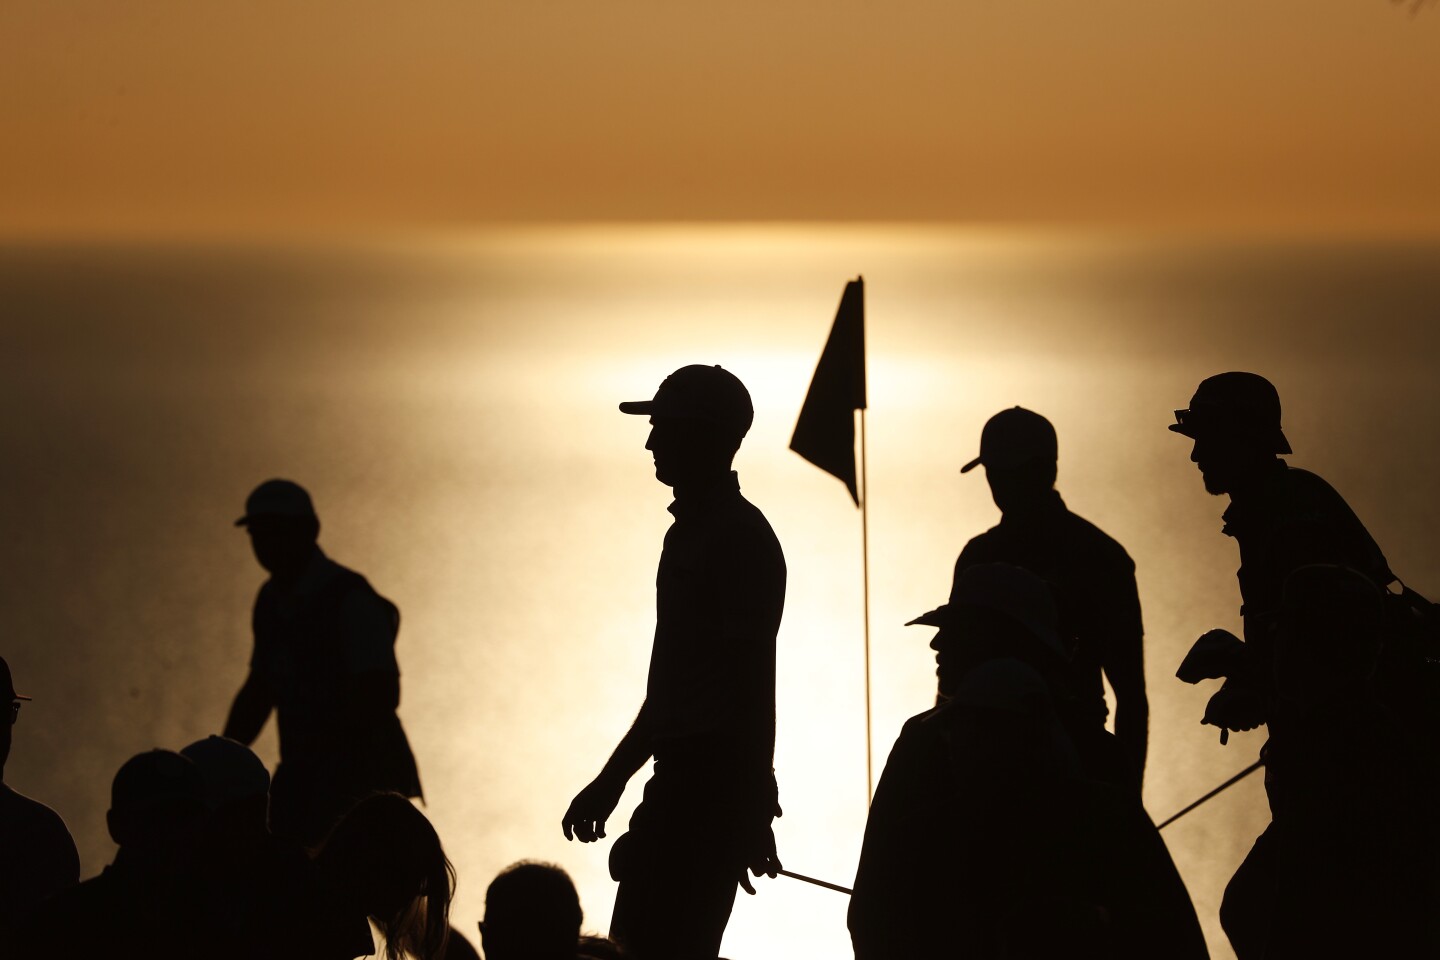 As the sun begins to set, golfers pass the 17th hole during the fourth round of the Farmers Insurance Open.